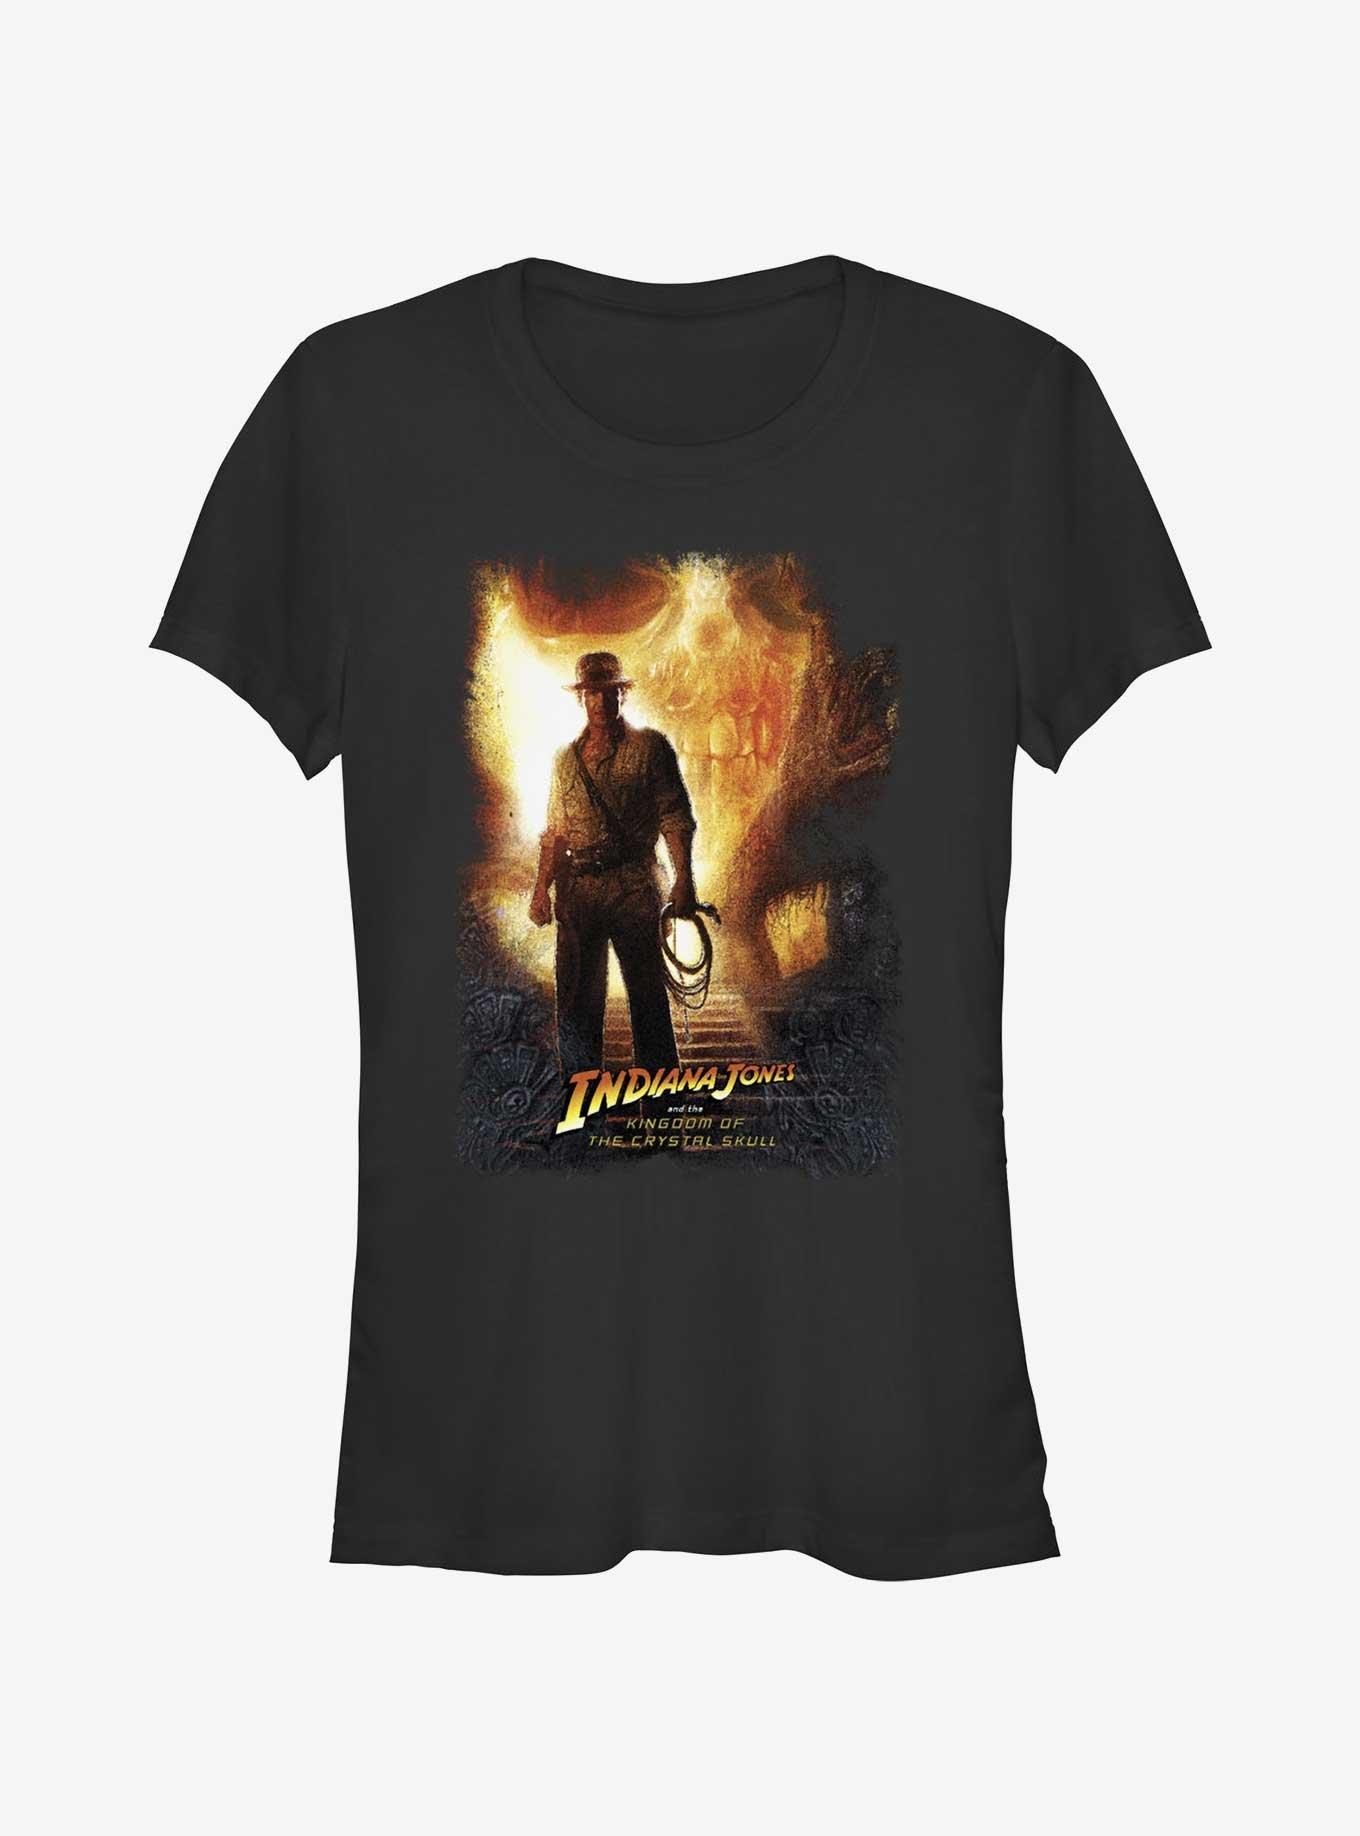 Indiana Jones and the Kingdom of the Crystal Skull Poster Girls T-Shirt, BLACK, hi-res